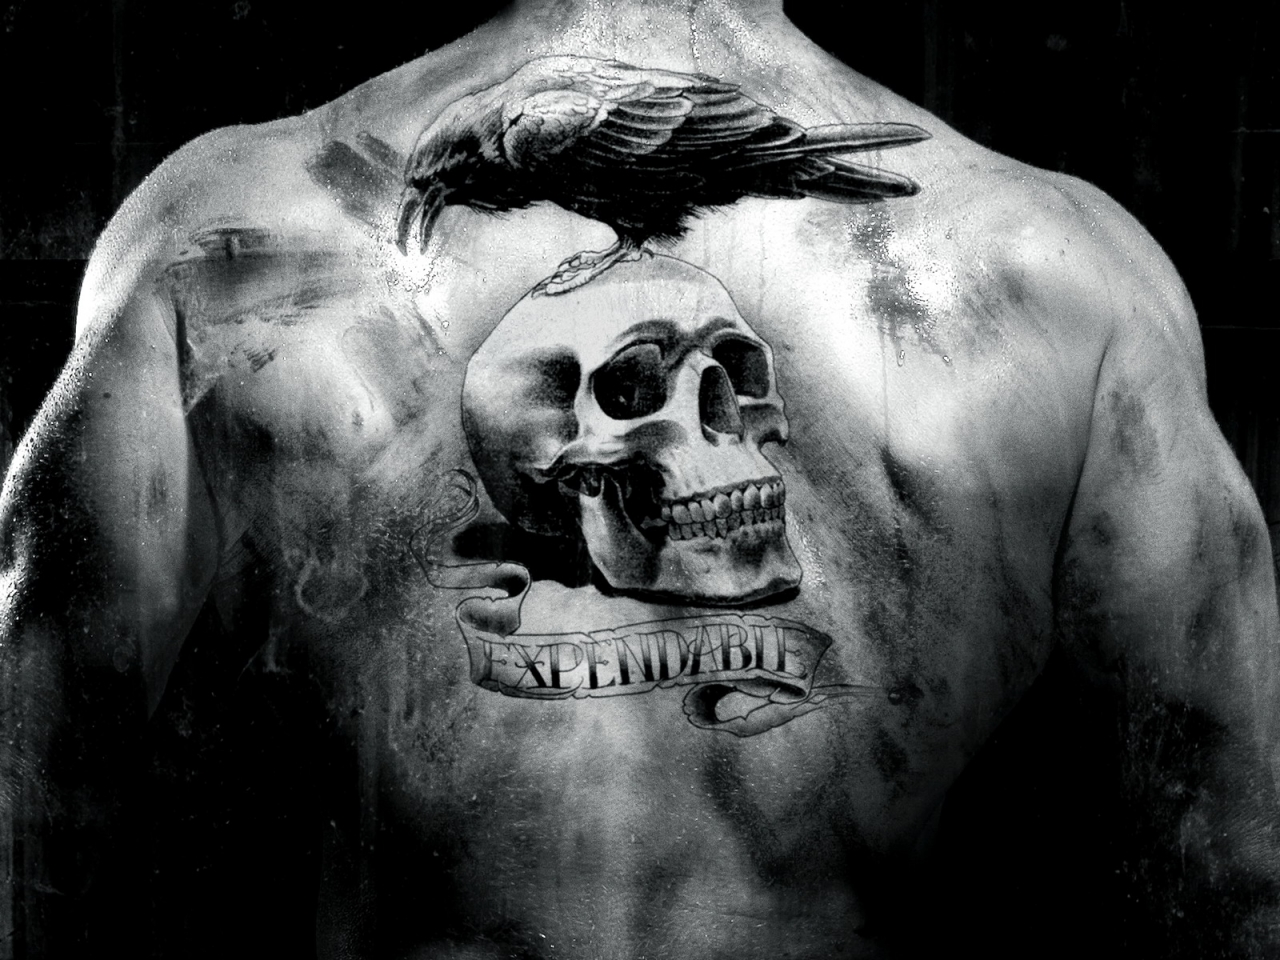 Tattoo And Expendables Image - Expendables Movie Tattoo - HD Wallpaper 